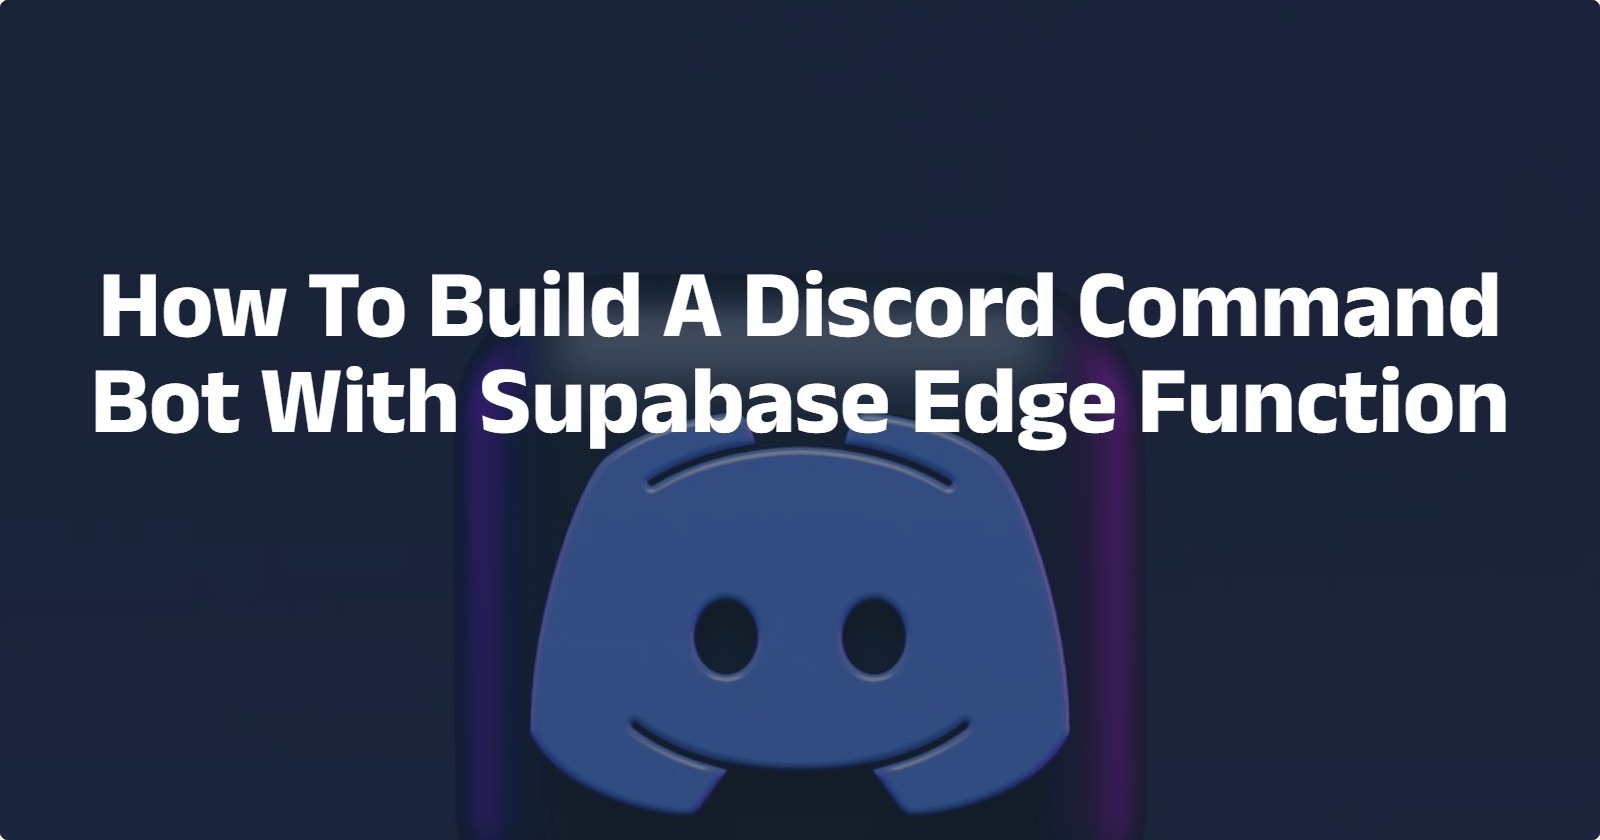 How To Build A Discord Command Bot With Supabase Edge Function